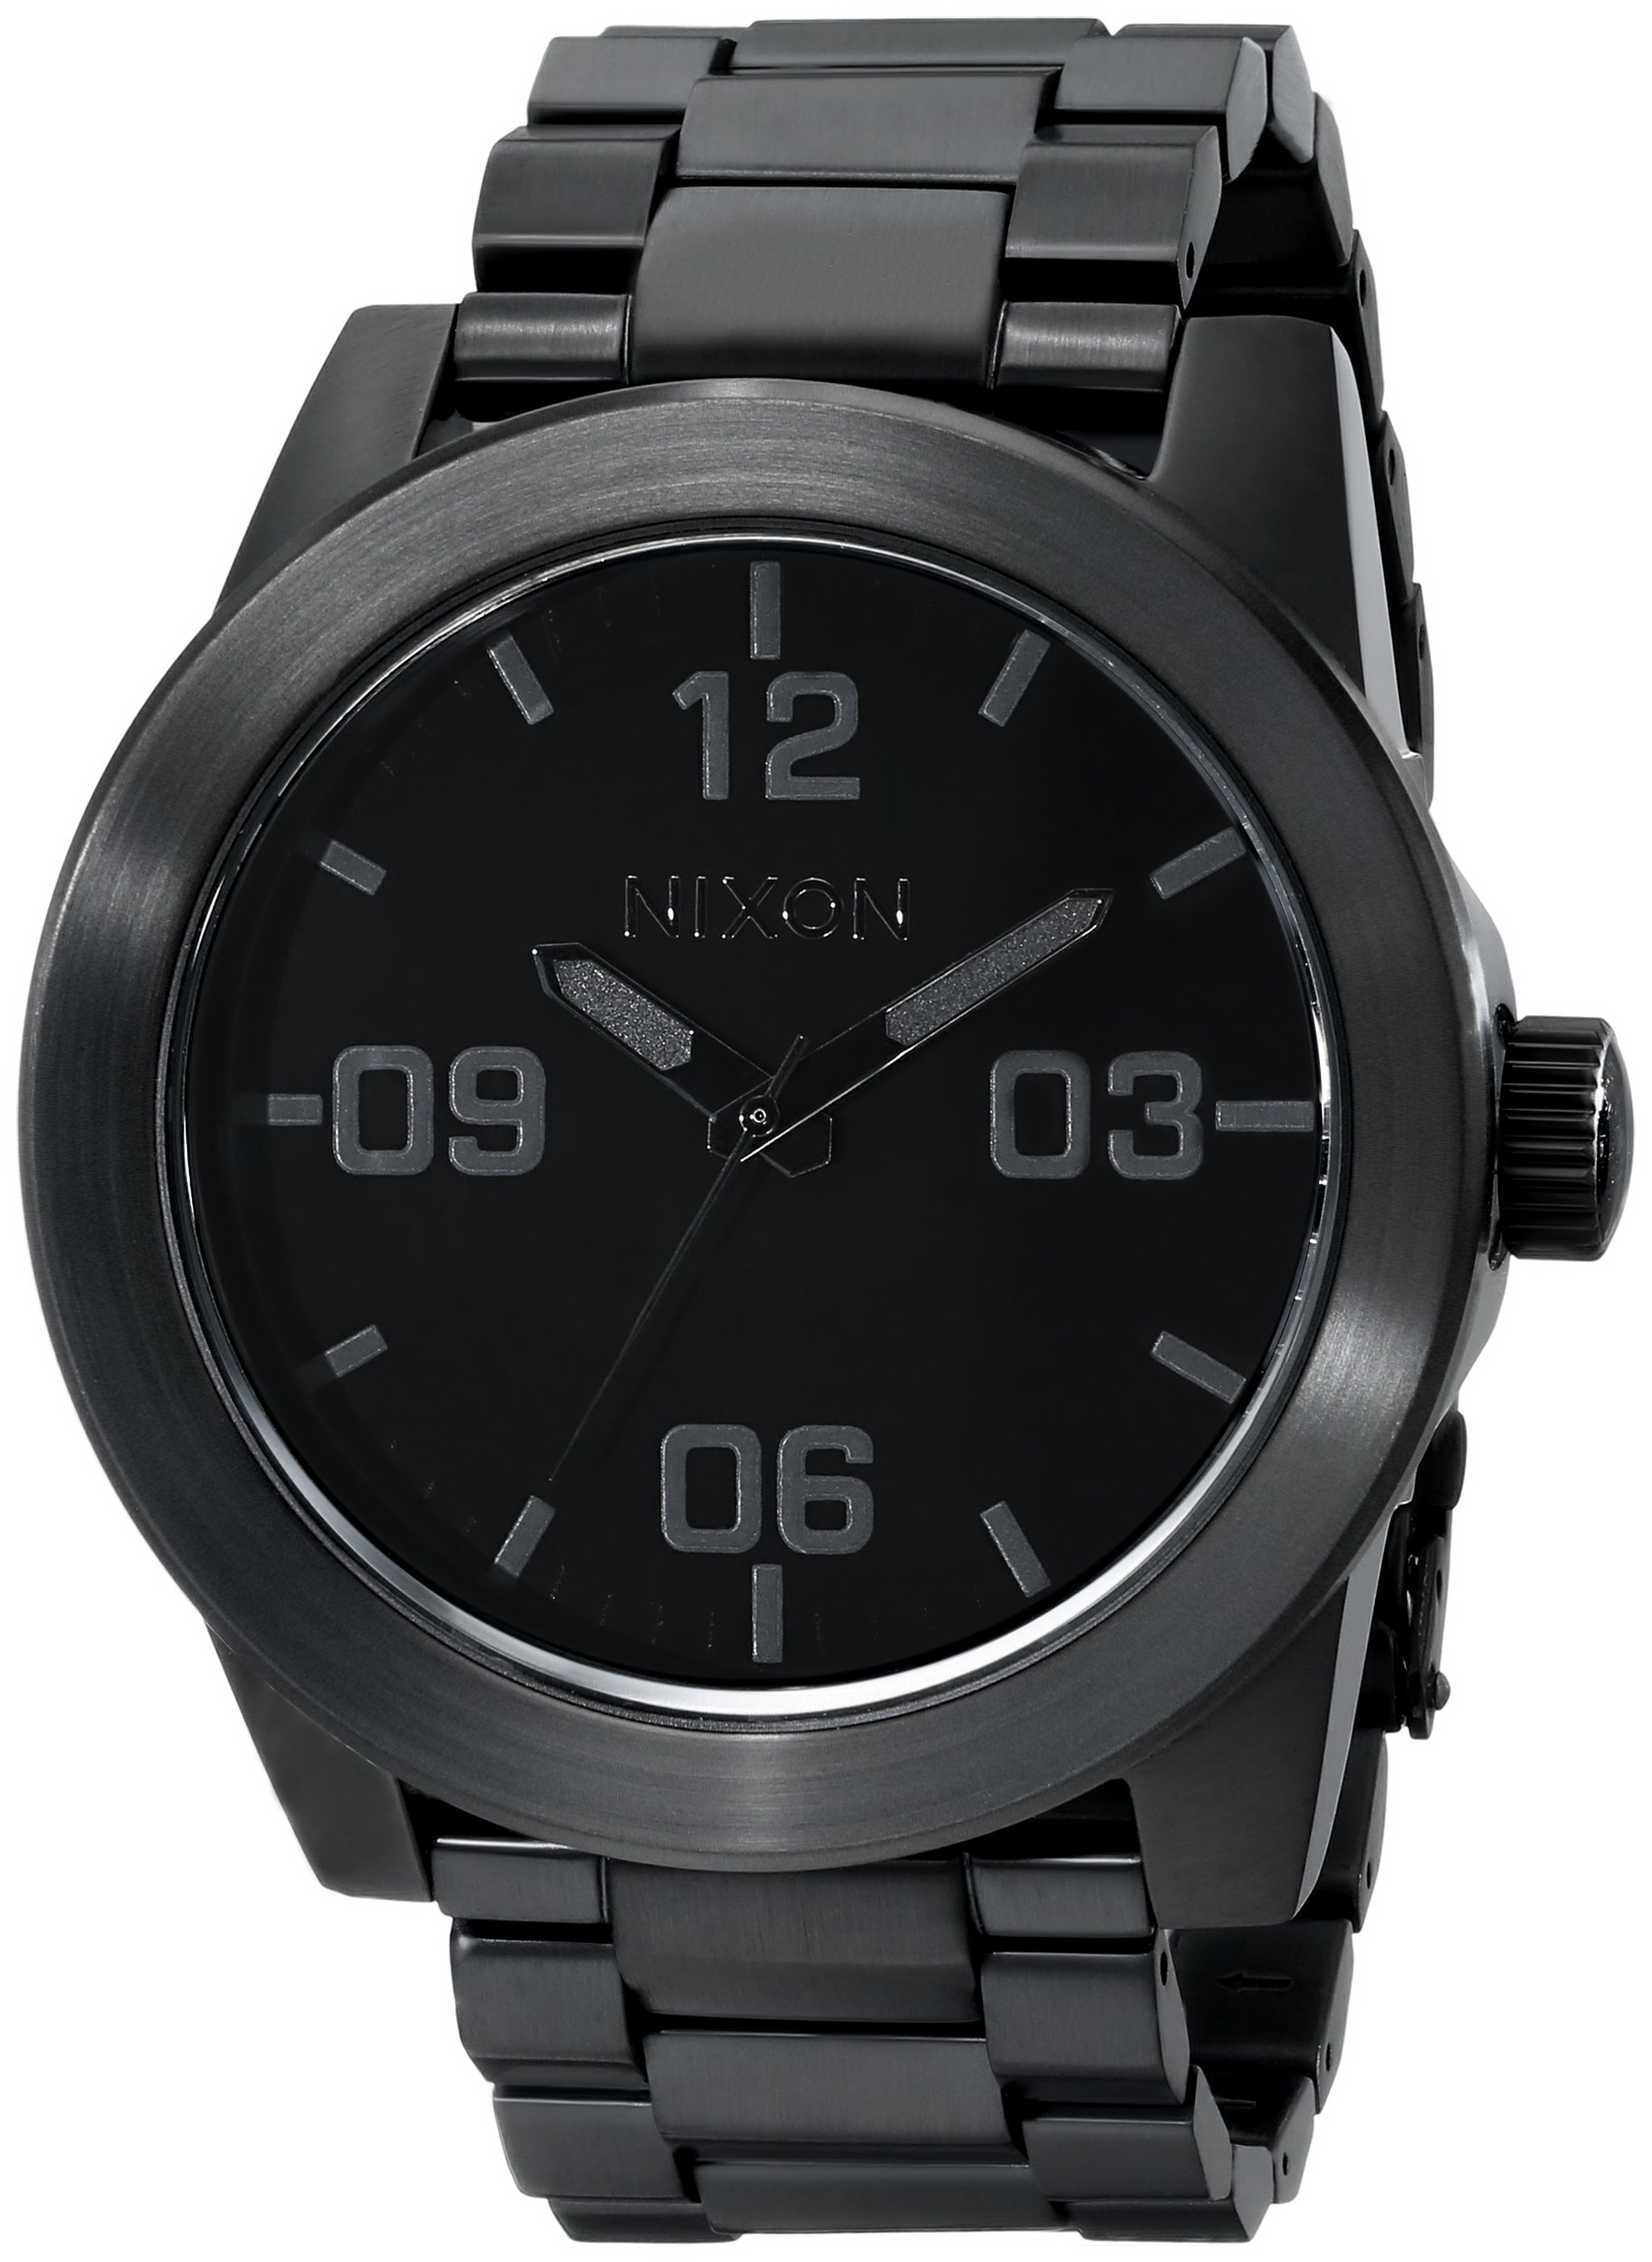 NIXON Corporal SS A346. 100m Water Resistant XL Mens Watch 48mm Watch Face. 24mm Stainless Steel Band並行輸入品